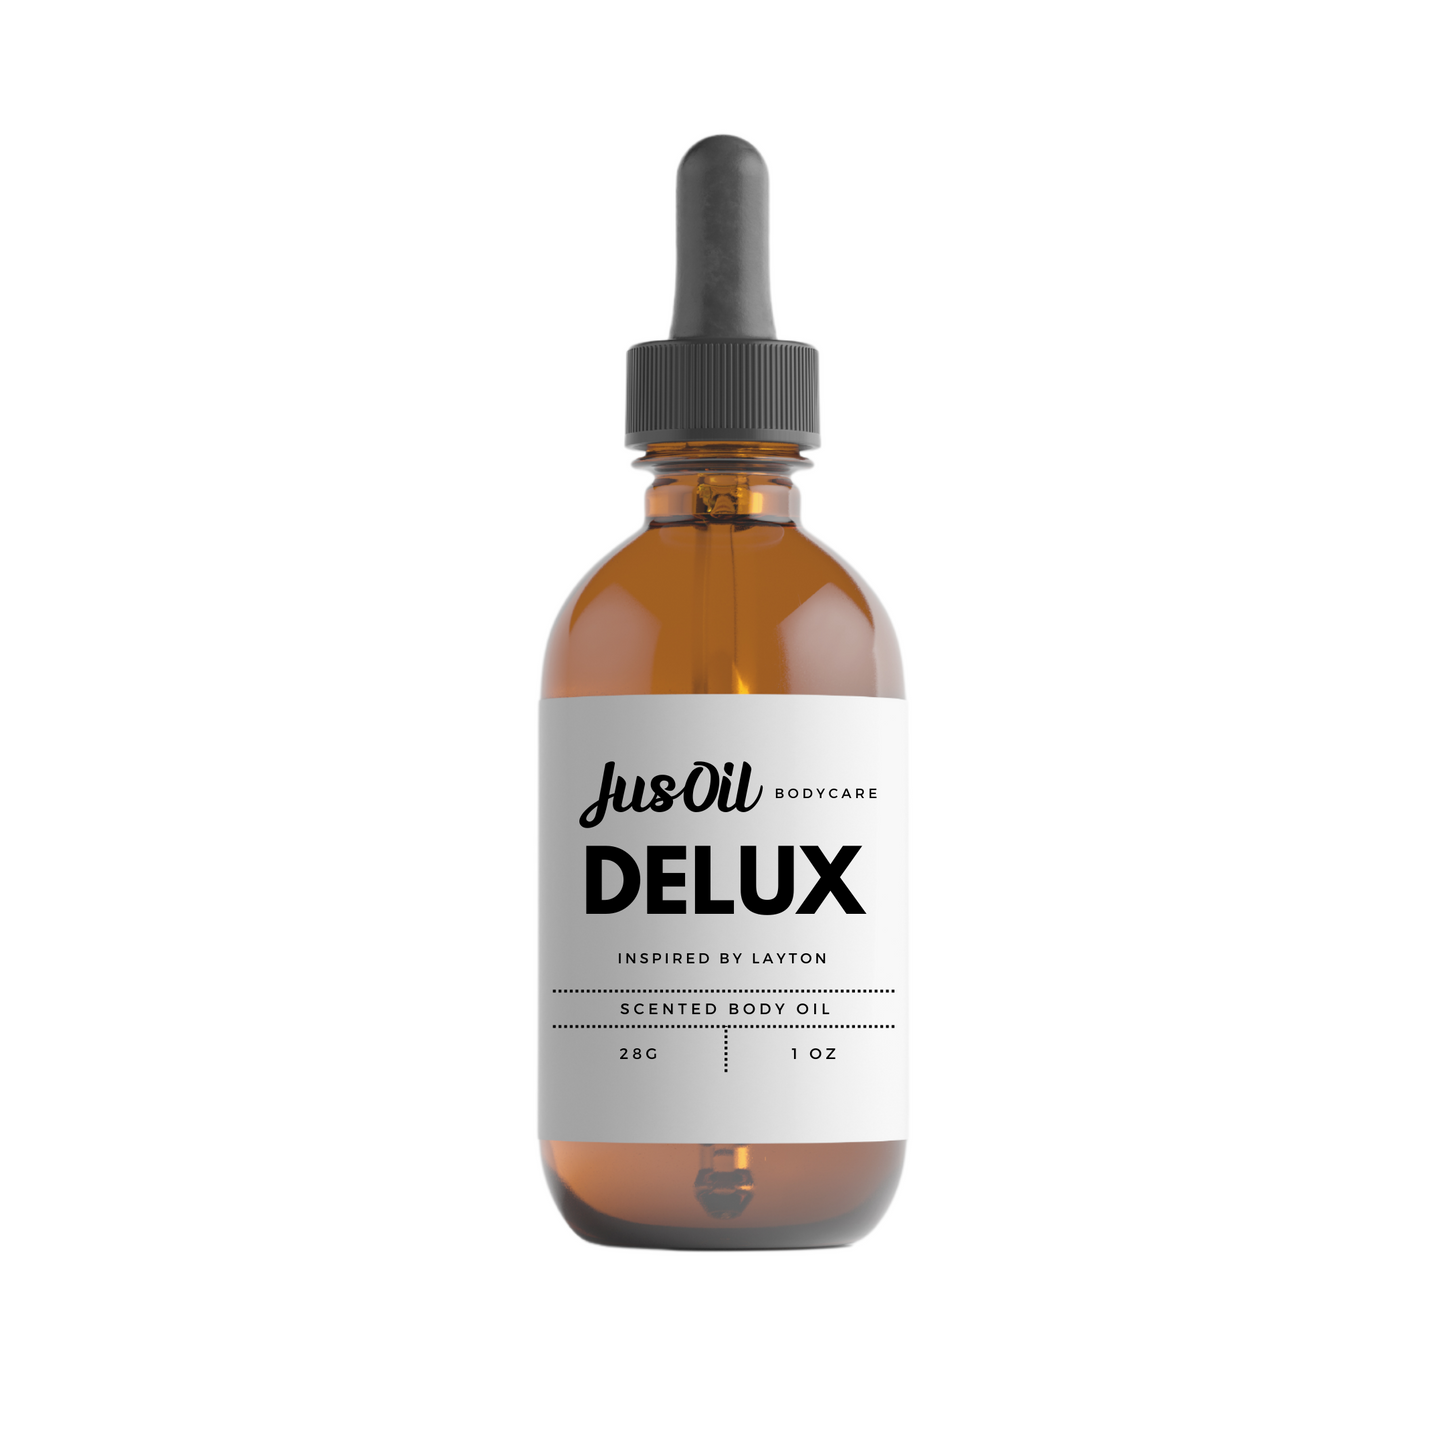 DeLux Luxury Scented Body Oil - Inspired by Layton Hydrating & Long-Lasting